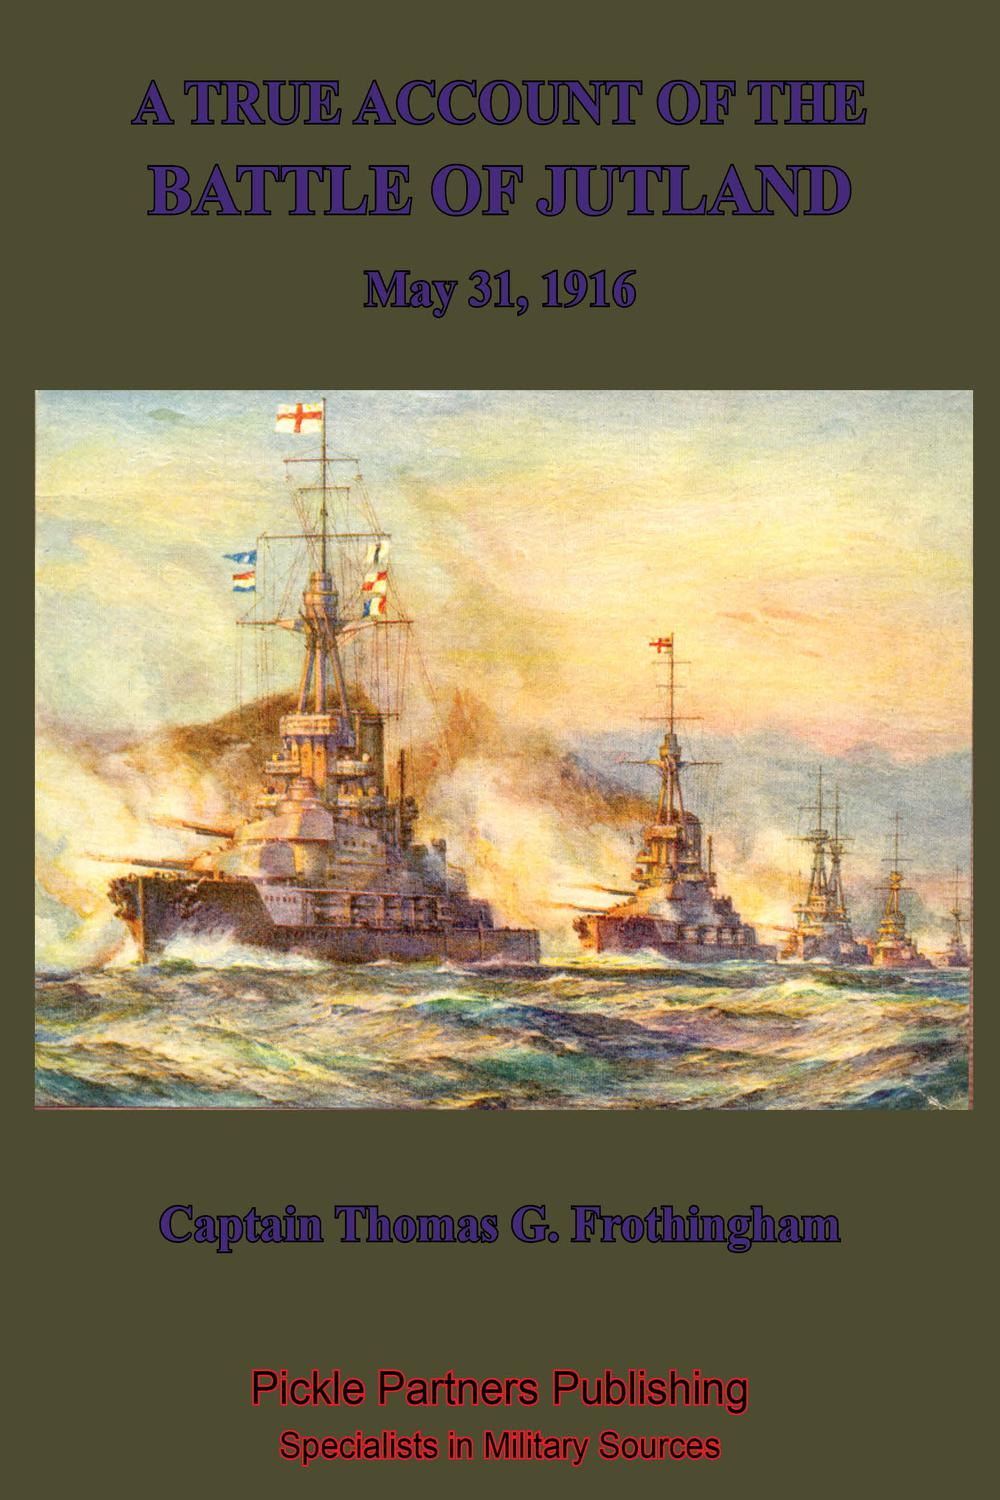 A True Account Of The Battle Of Jutland, May 31, 1916 - Captain Thomas Frothingham U.S.N.R.